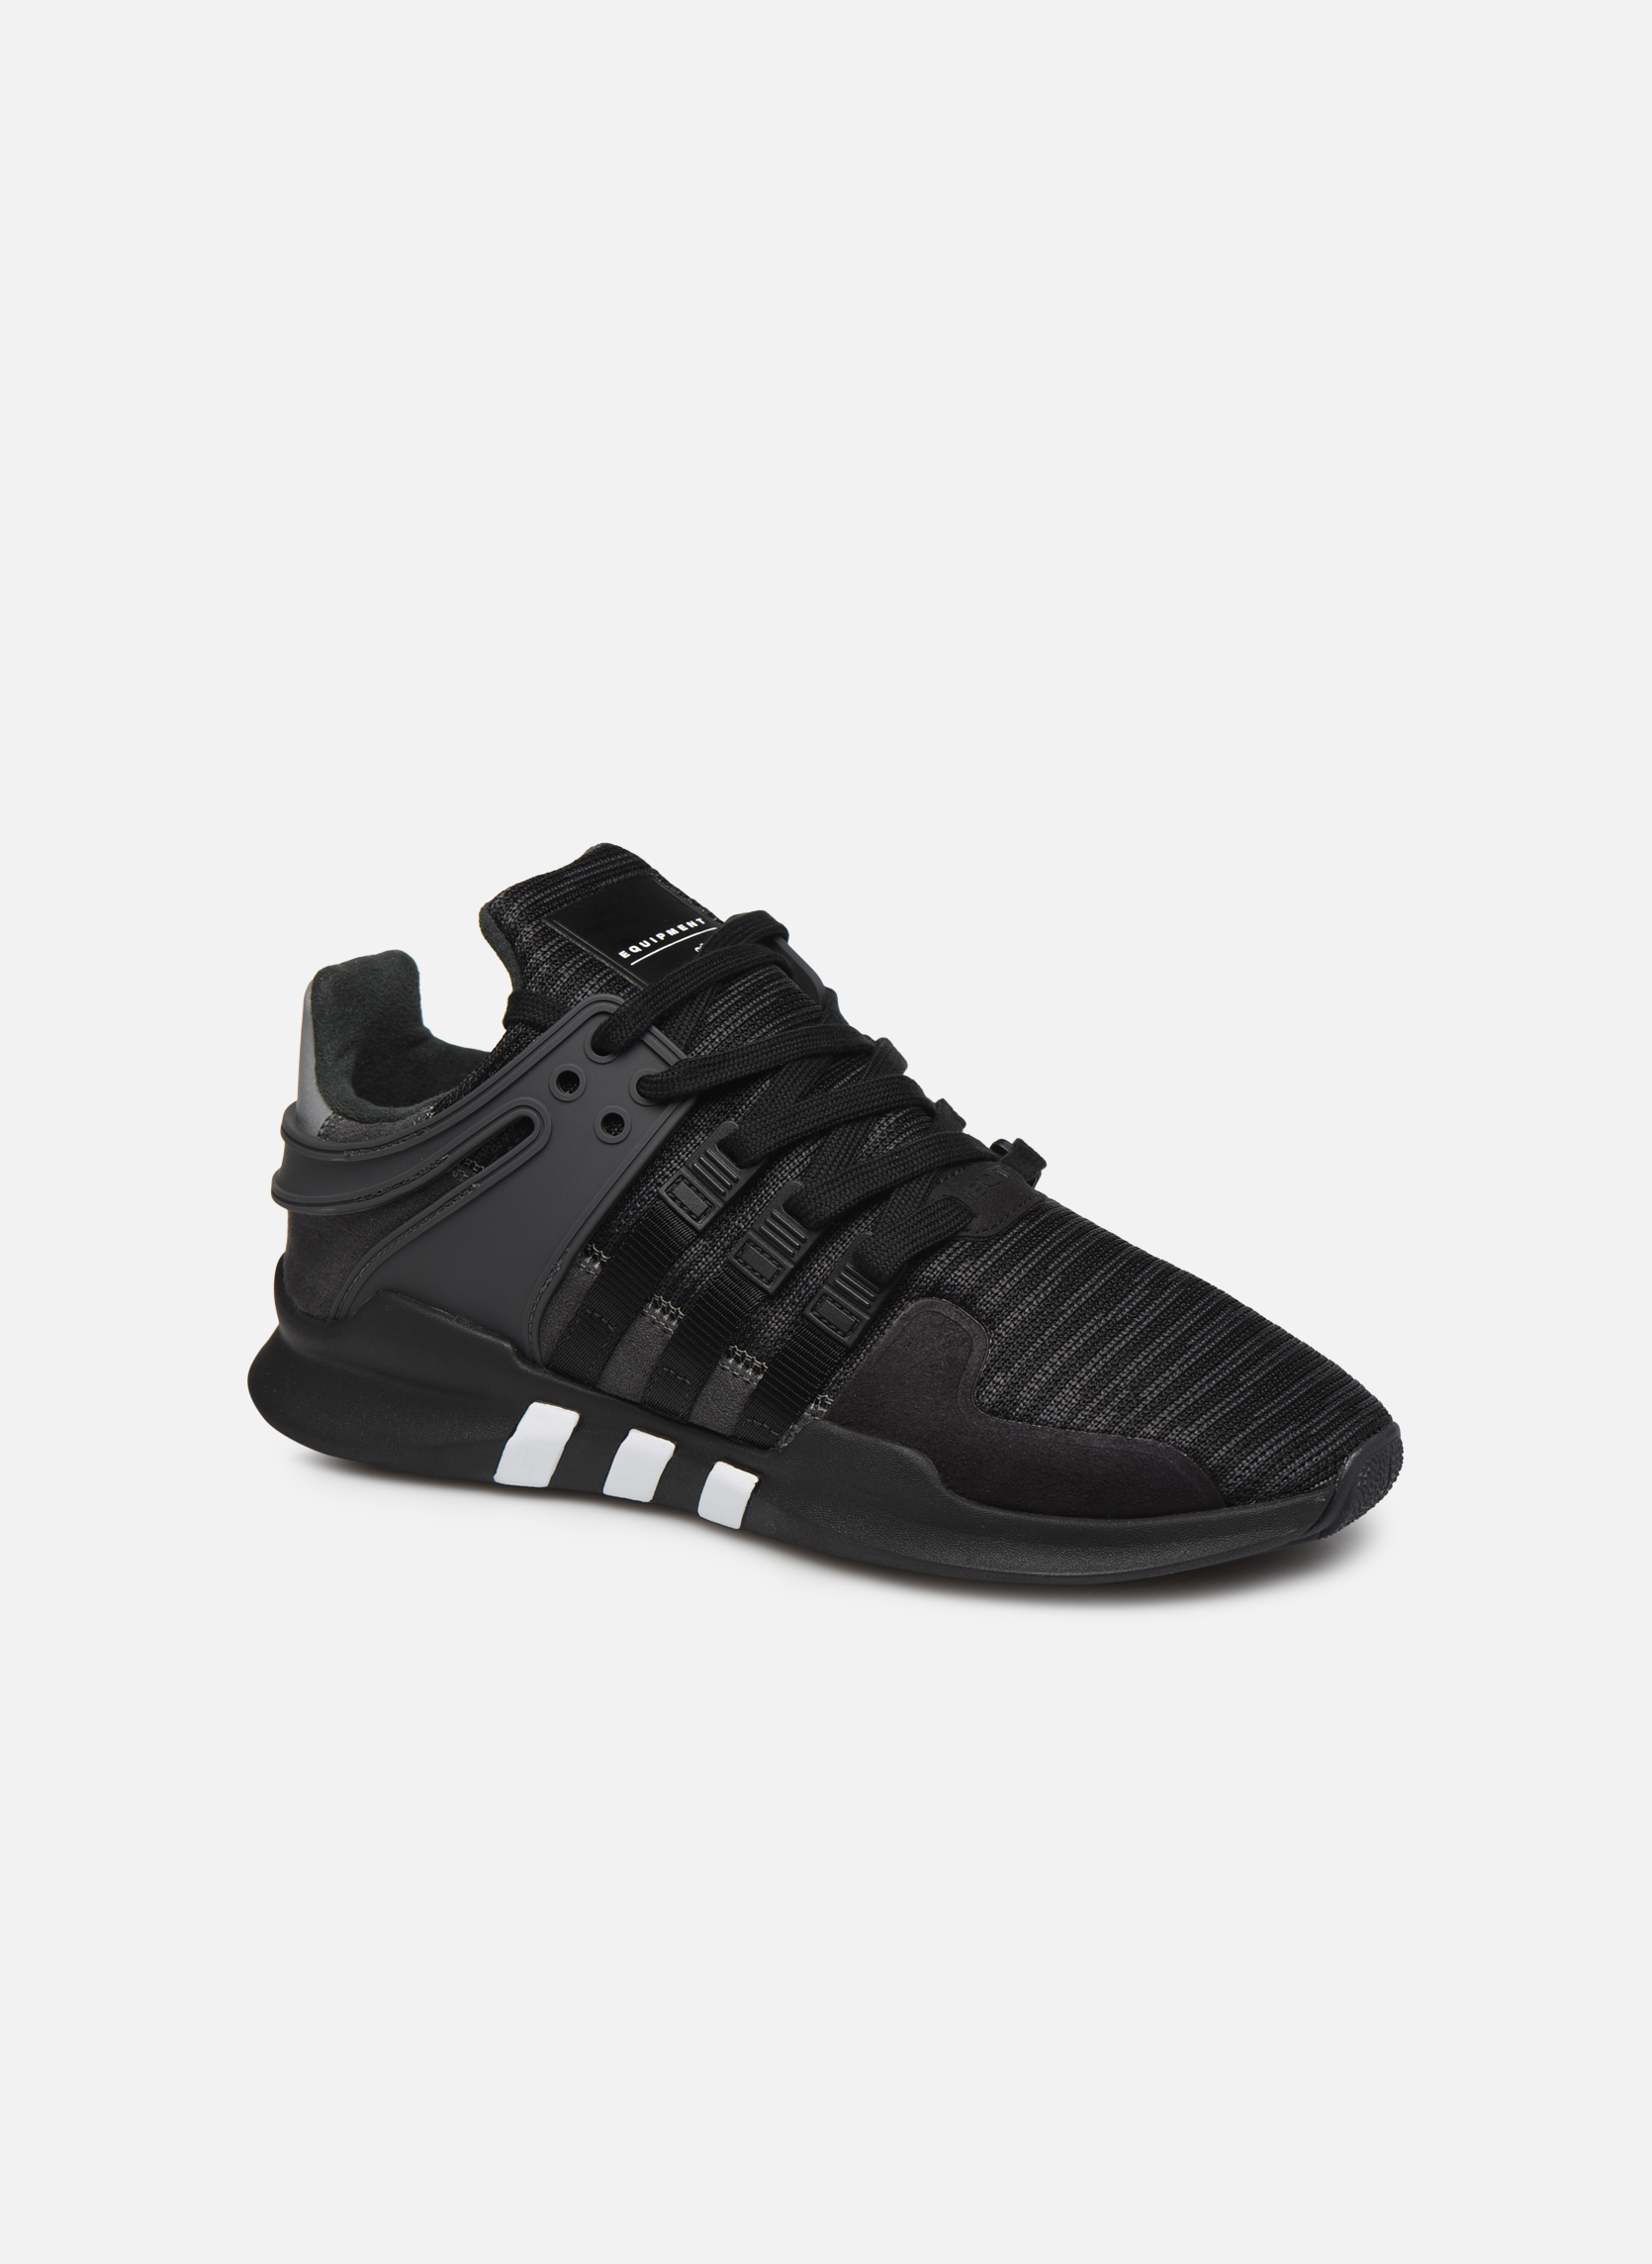 adidas eqt support sock femme or